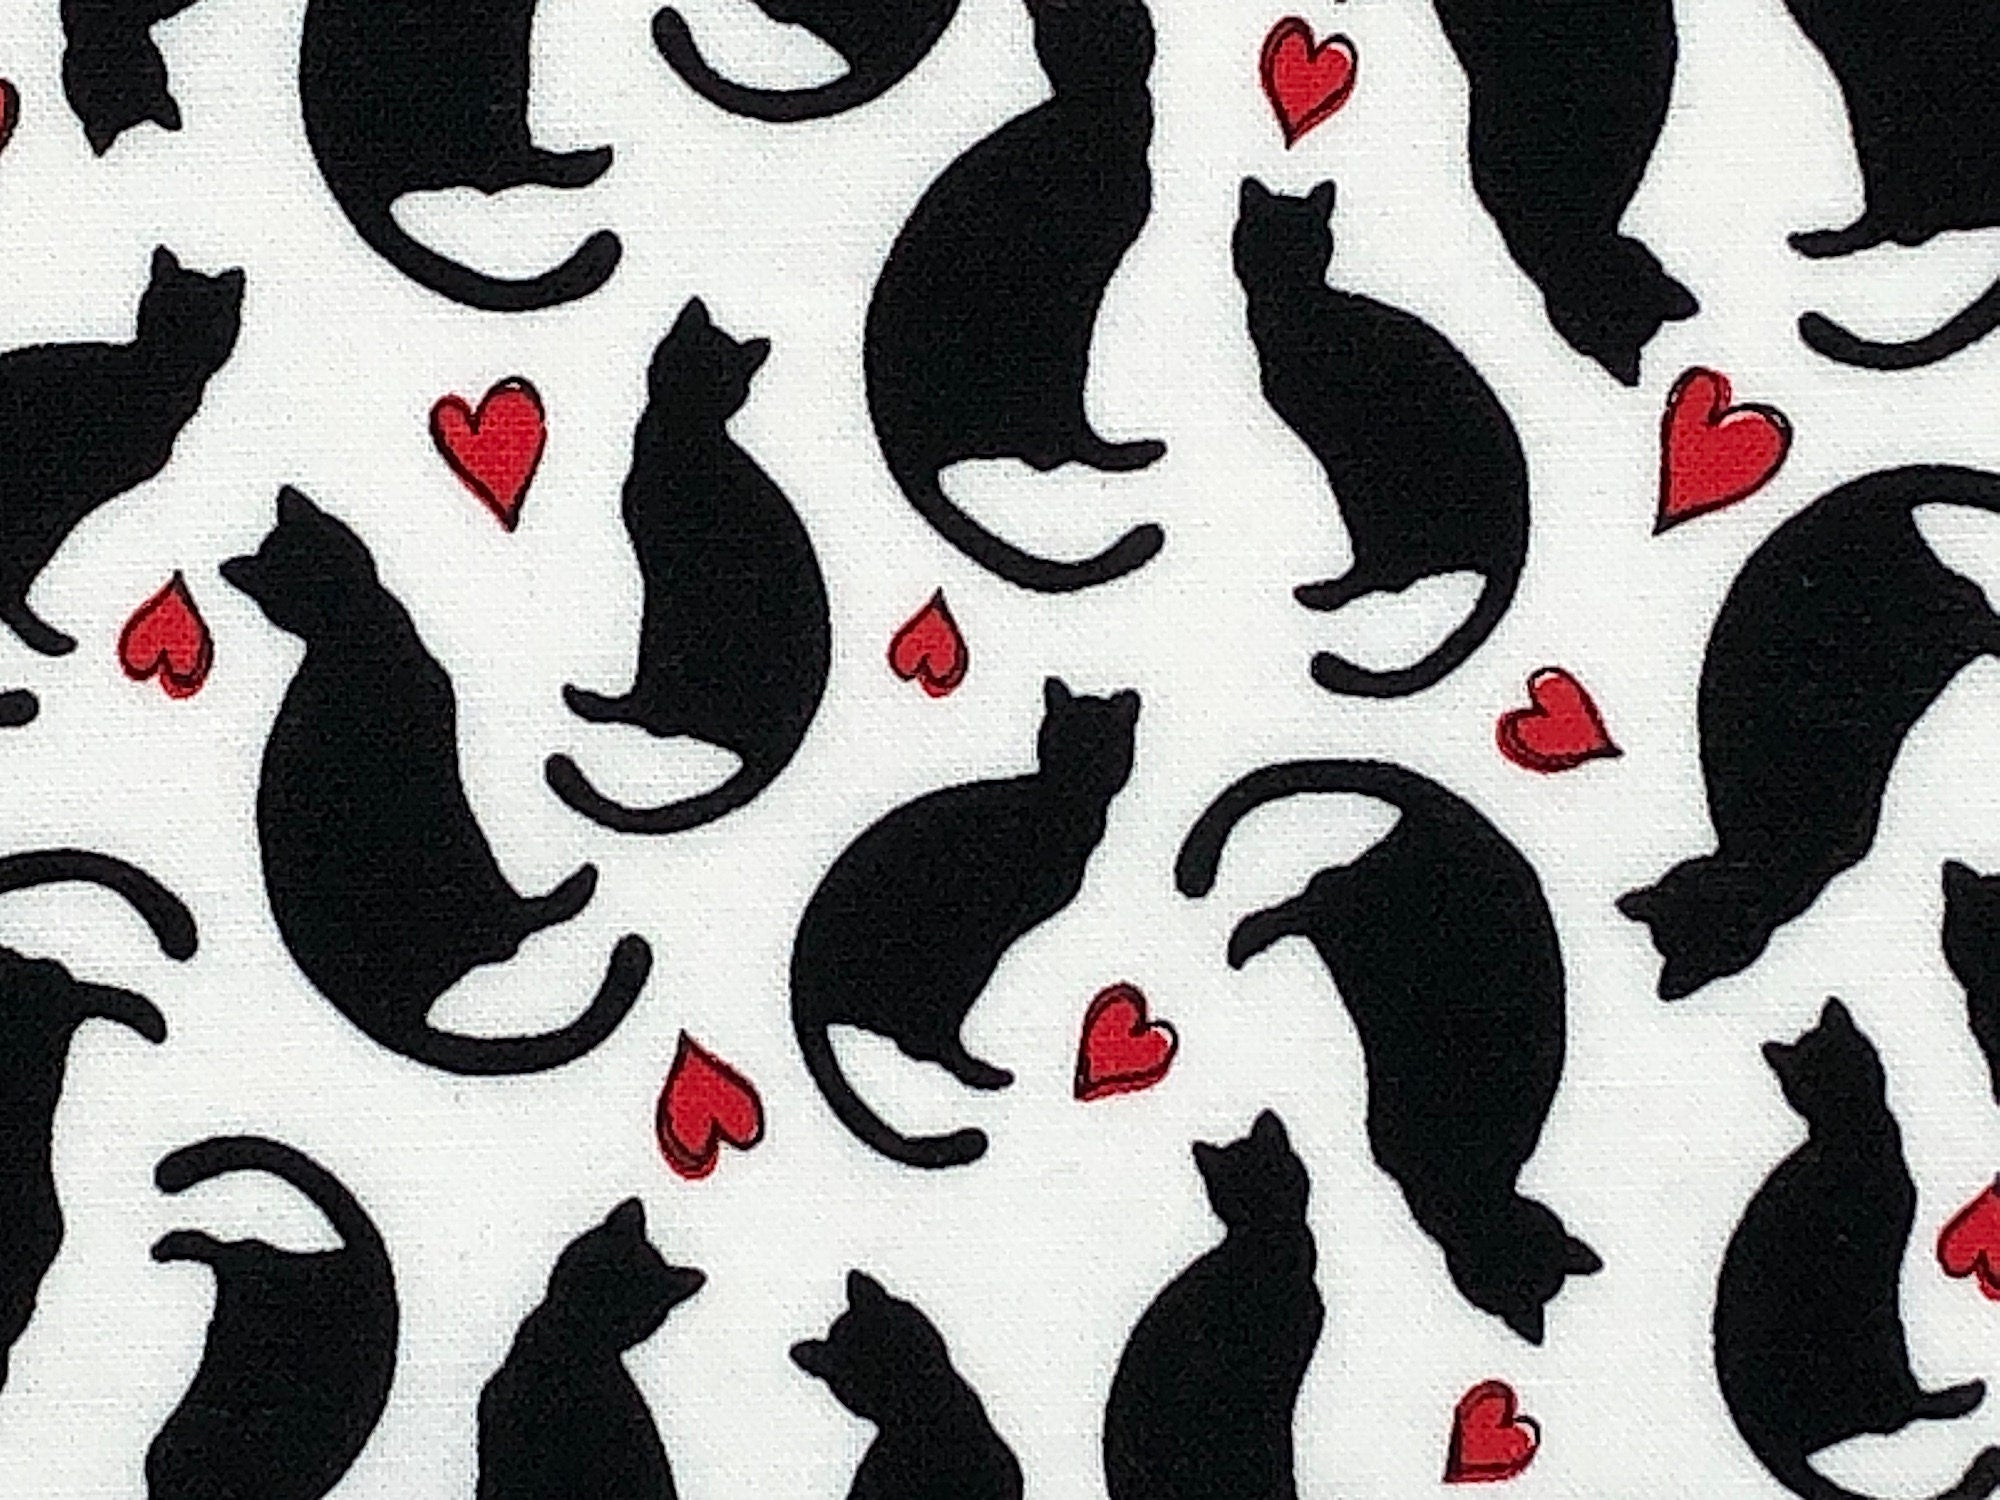 Close up of back cats and red hearts on a white background.